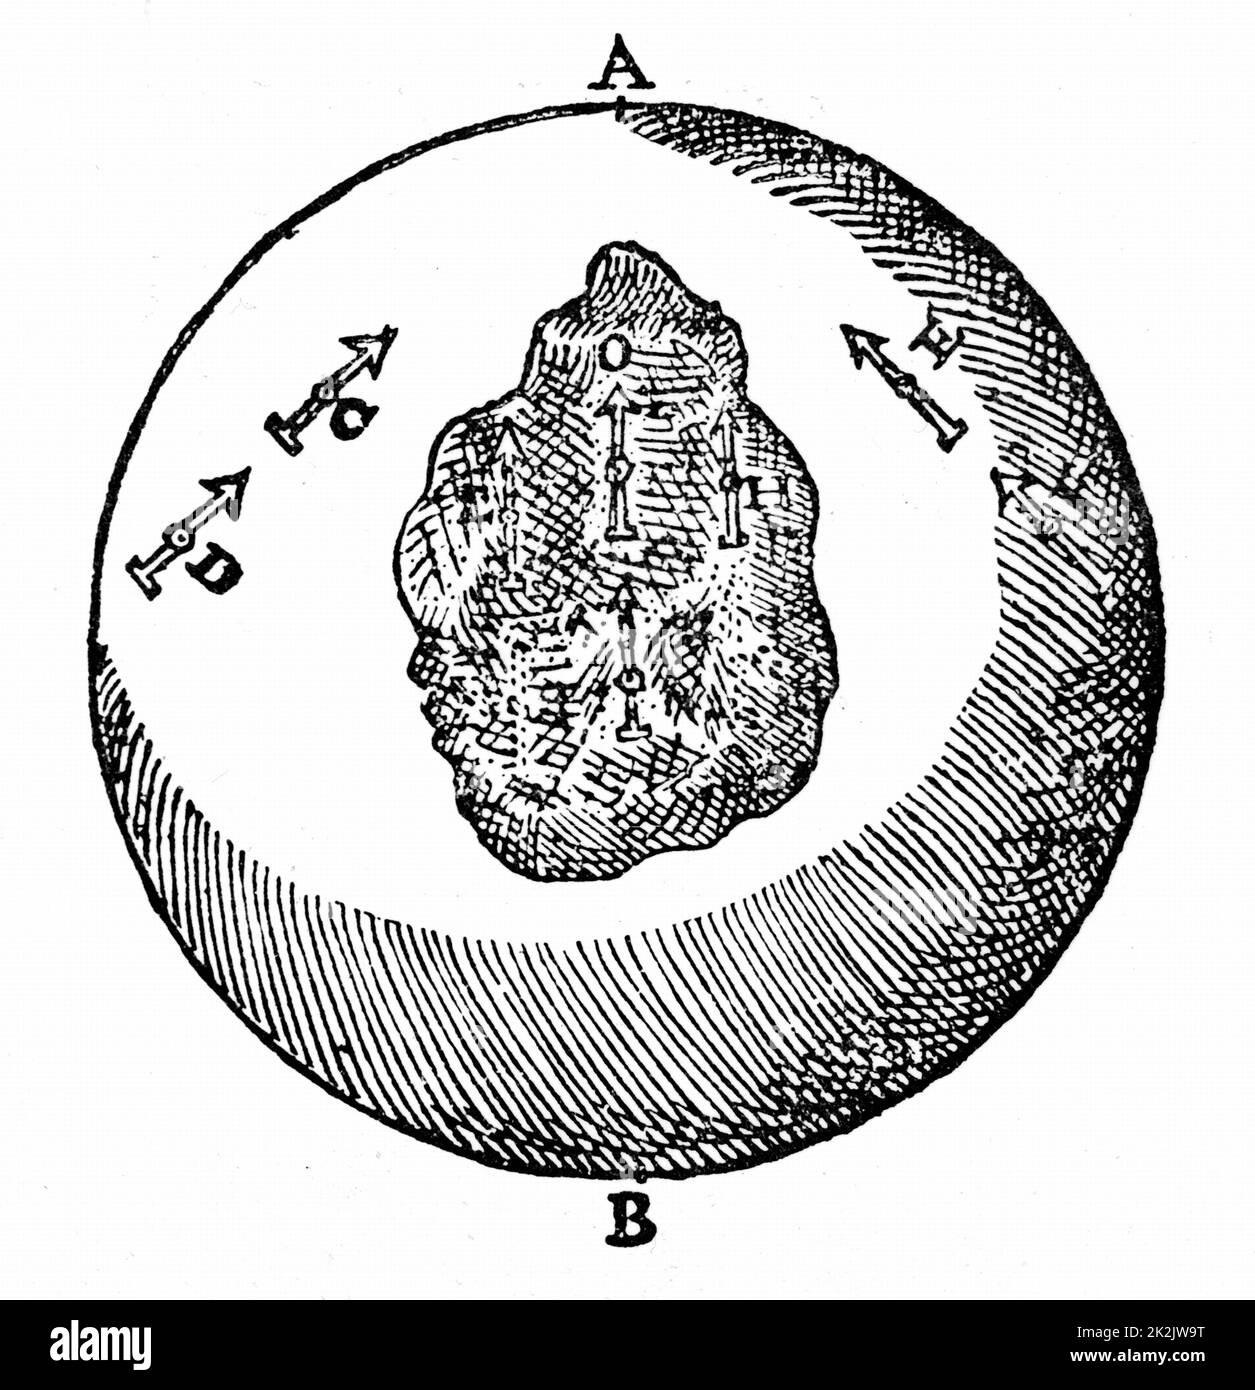 Magnetic needles on a terrella will point towards the north pole, A. other needles will do likewise, even though the surface of the terrella is uneven, as at O. From William Gilbert 'De Magnete', London, 1600 Stock Photo